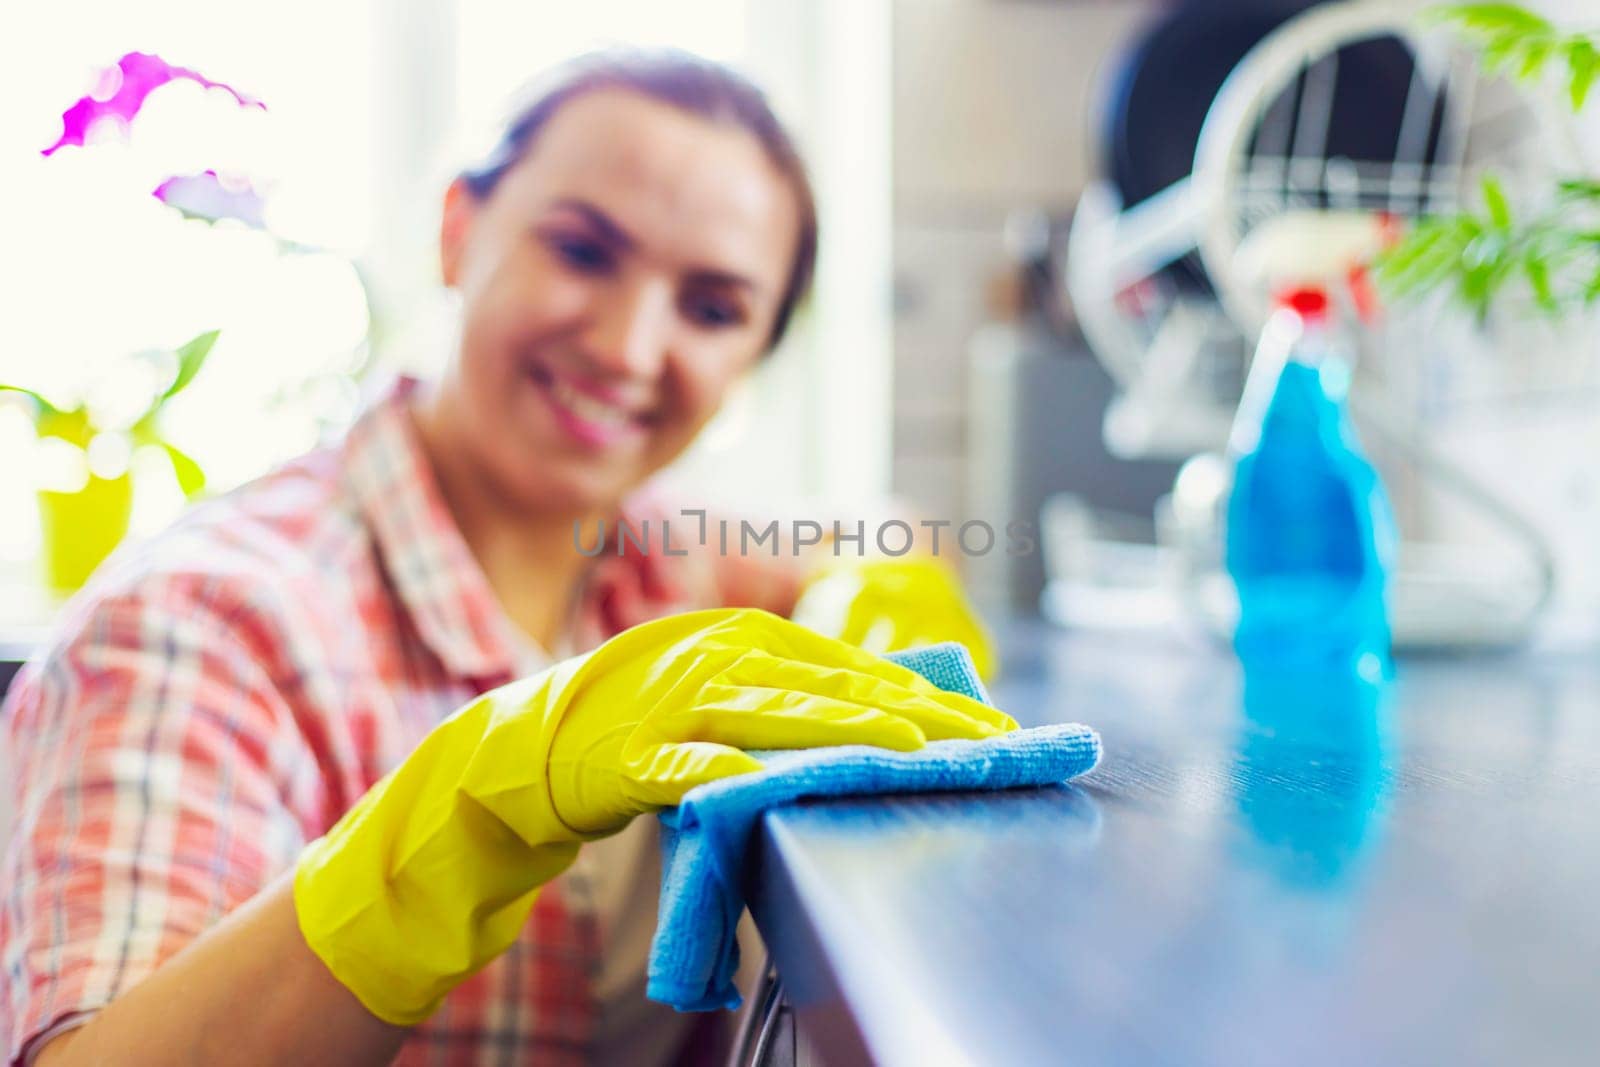 Housewife in yellow gloves wipes dust using spray detergent and rag. The woman is doing household chores. Cleaning concept